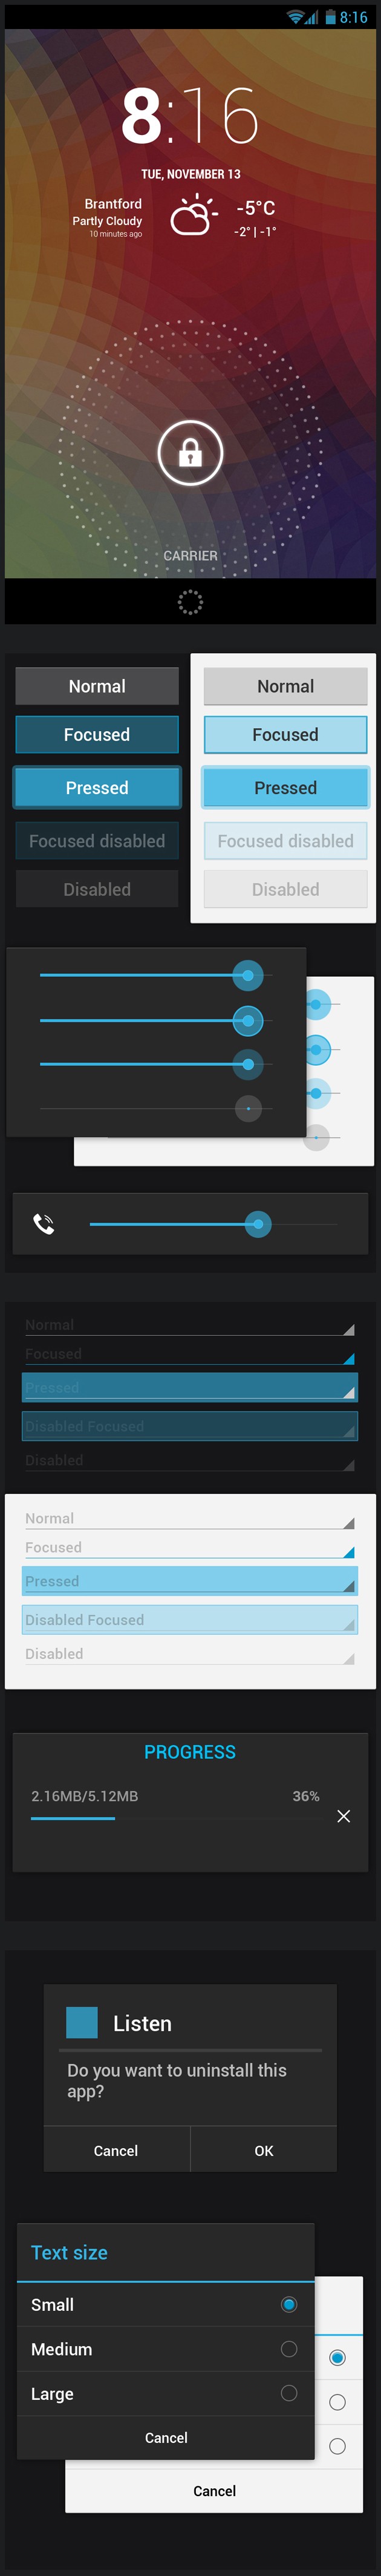 Android gui 02 